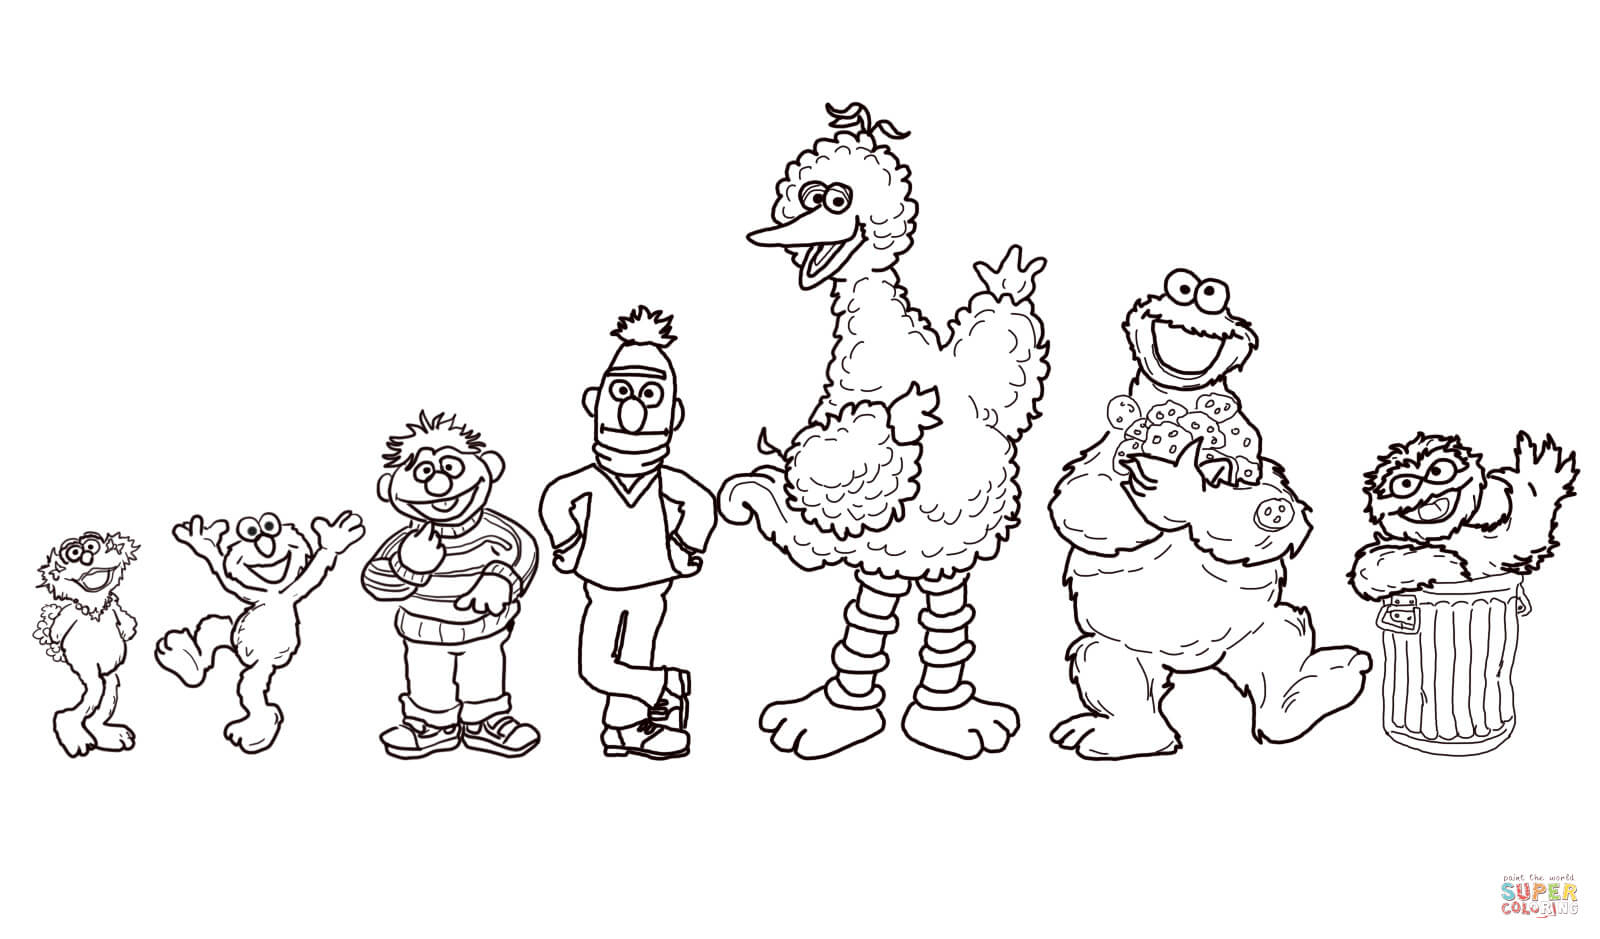 Sesame Street Characters Coloring Page | Free Printable Coloring Pages - Free Printable Sesame Street Coloring Pages